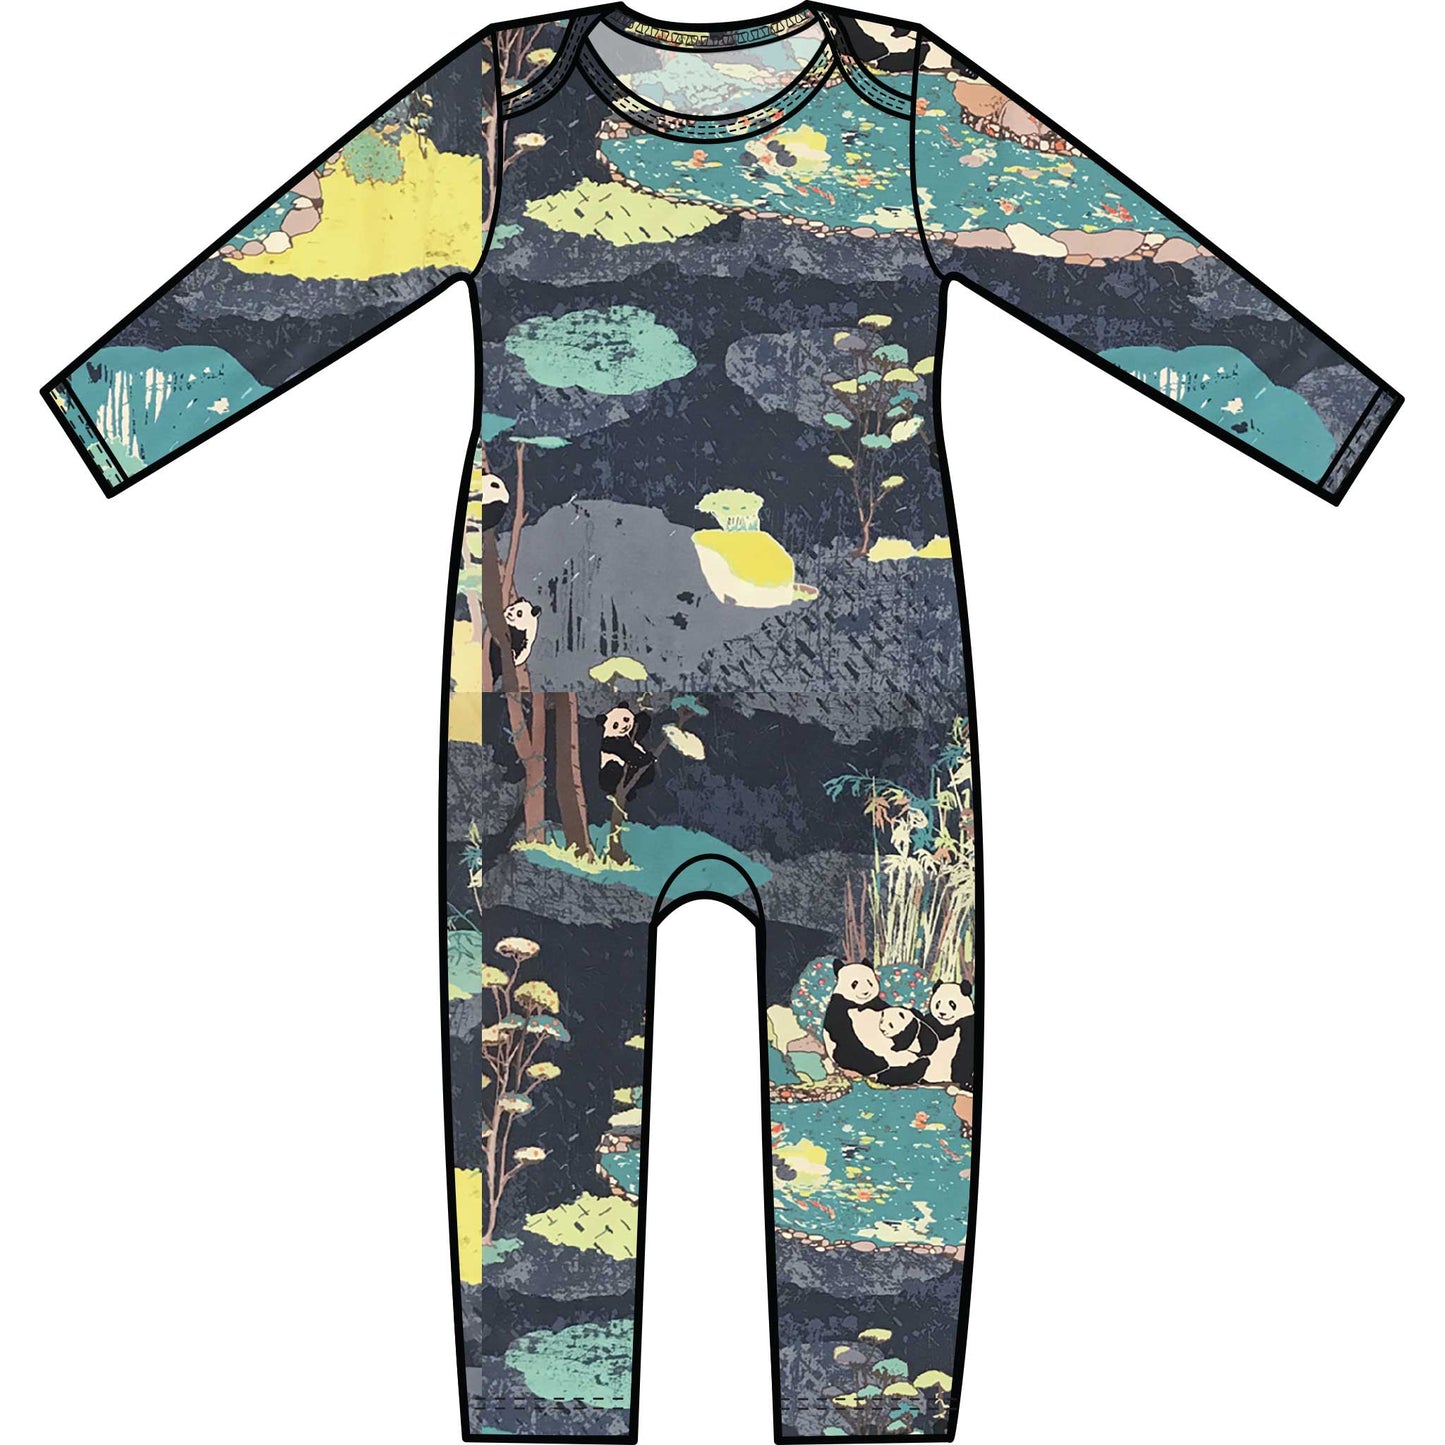 Mod Union™ Infant Long Sleeved Baby Union Suit | Various Fun Cotton Knit Prints-Baby One-Pieces-0-3 months-Panda Garden-Hagsters